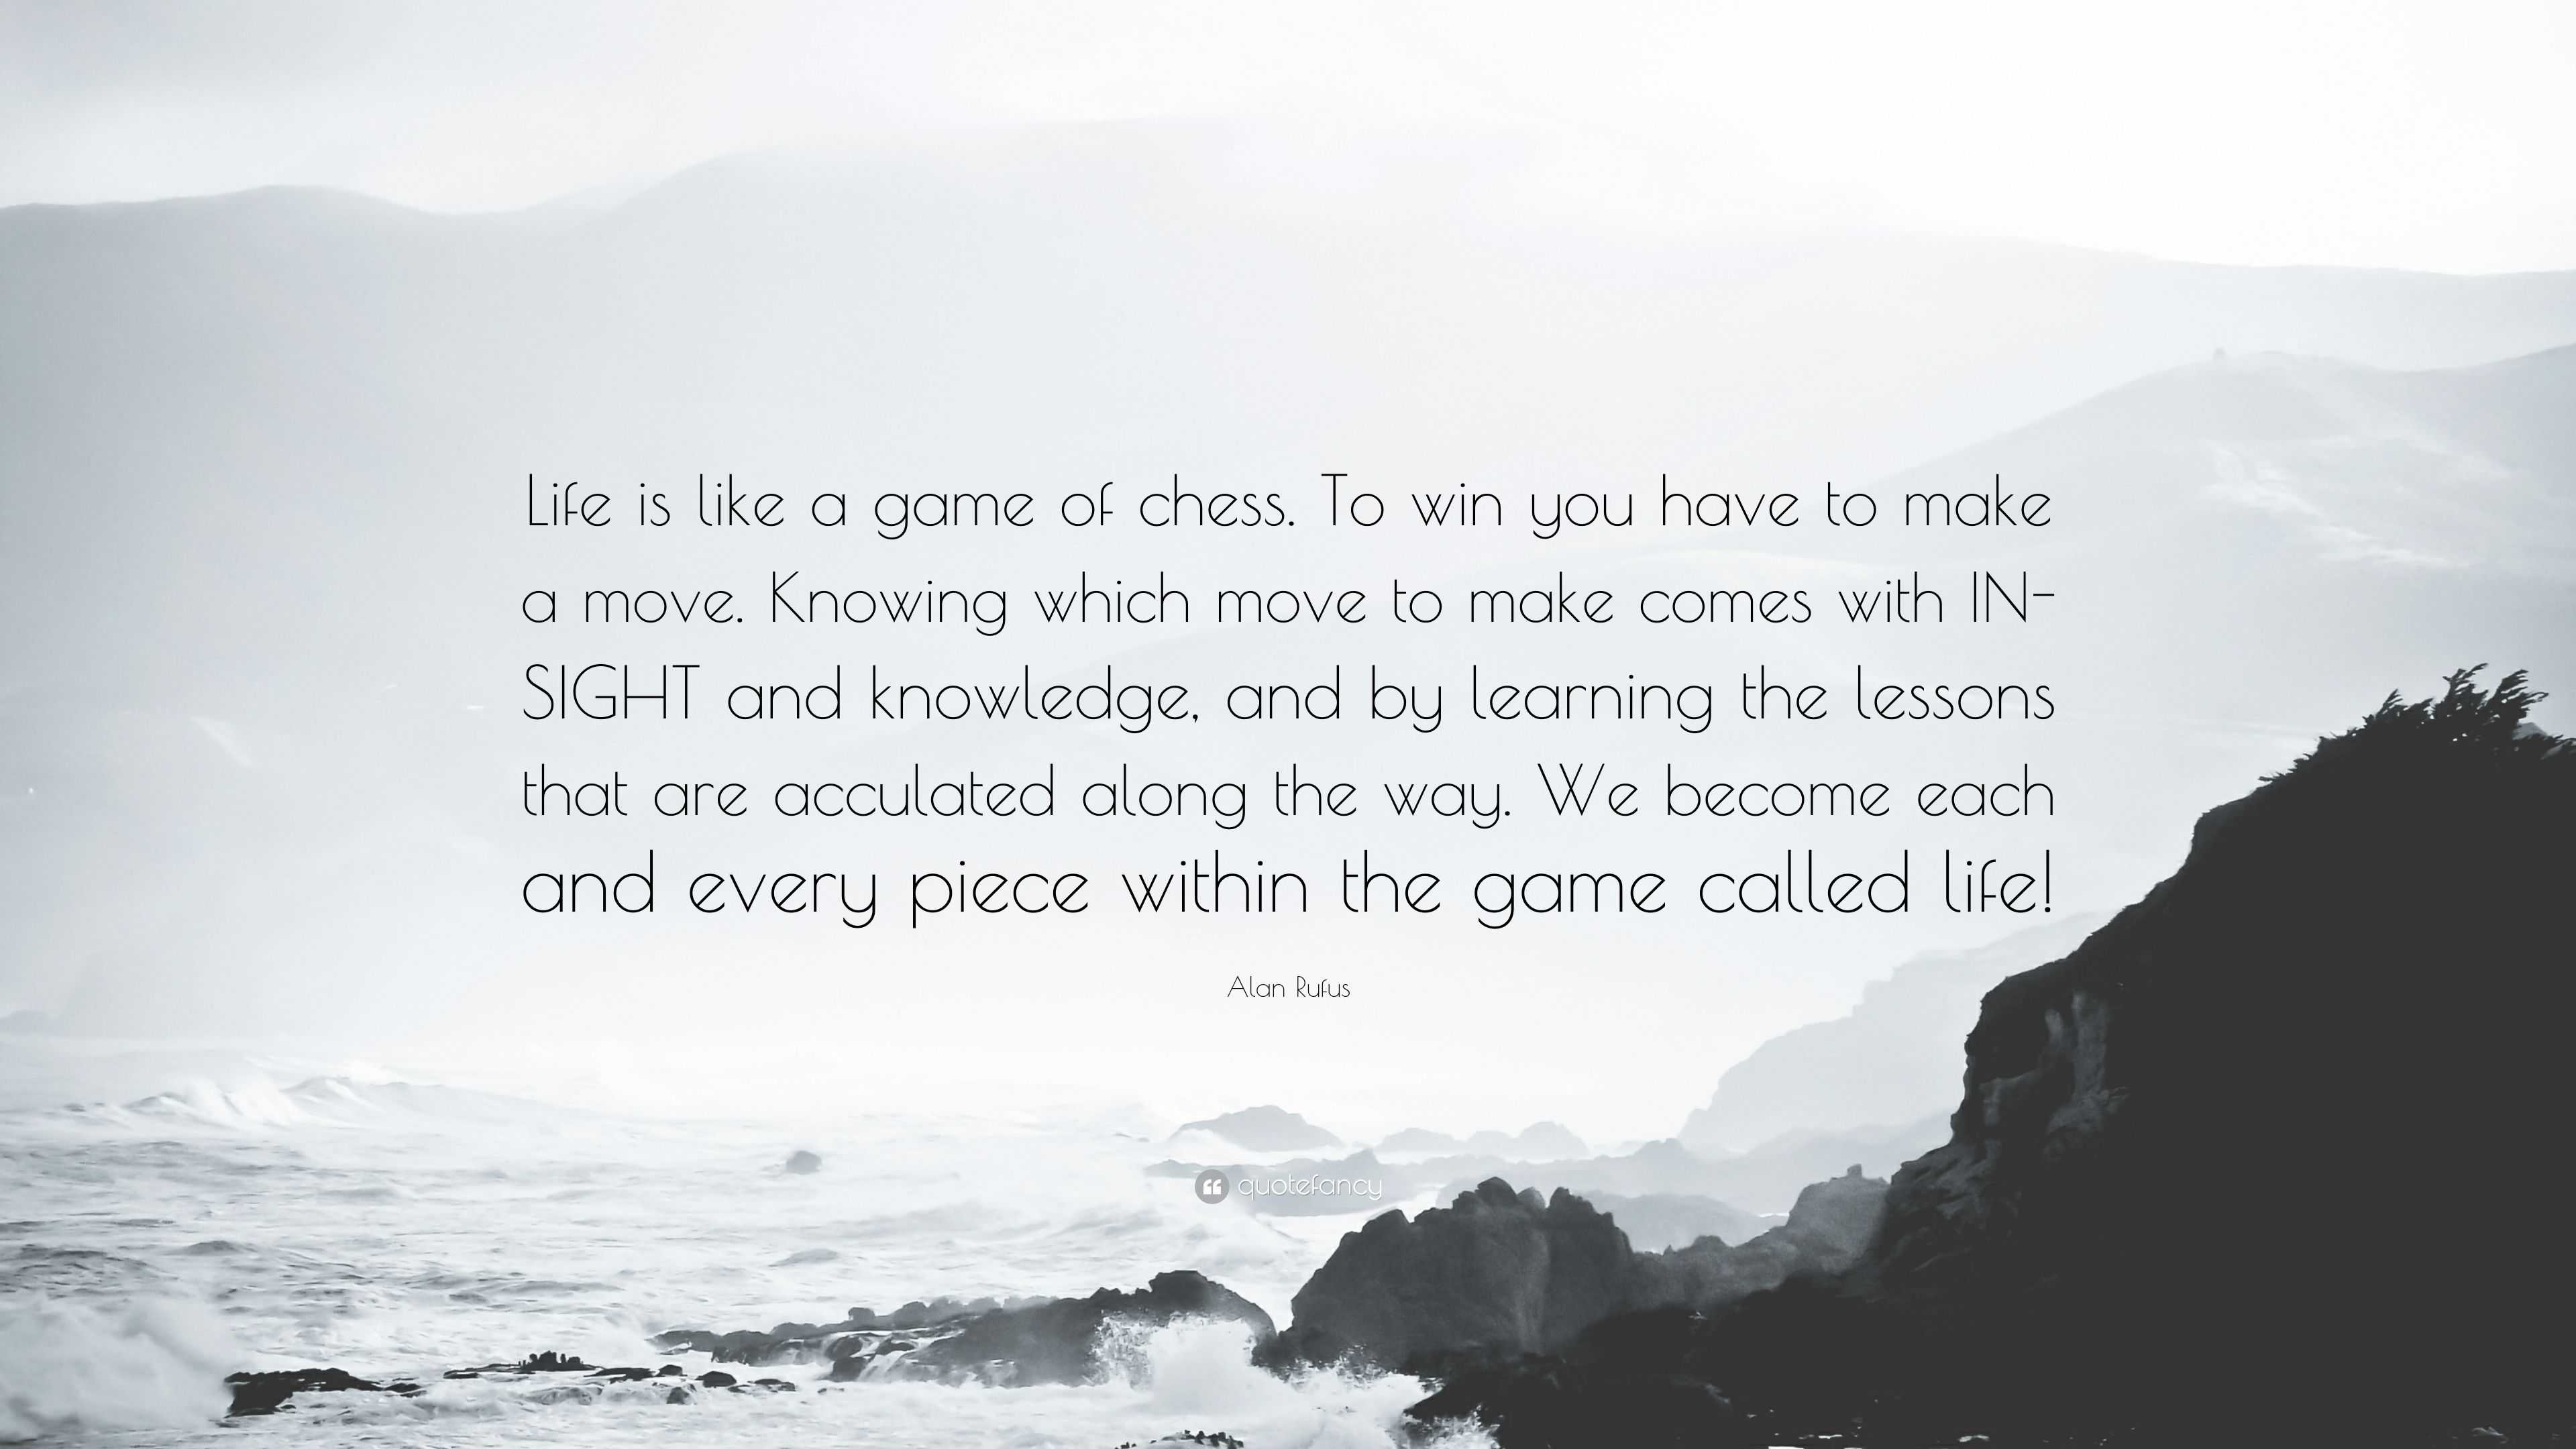 Life is like a game of chess - spunout